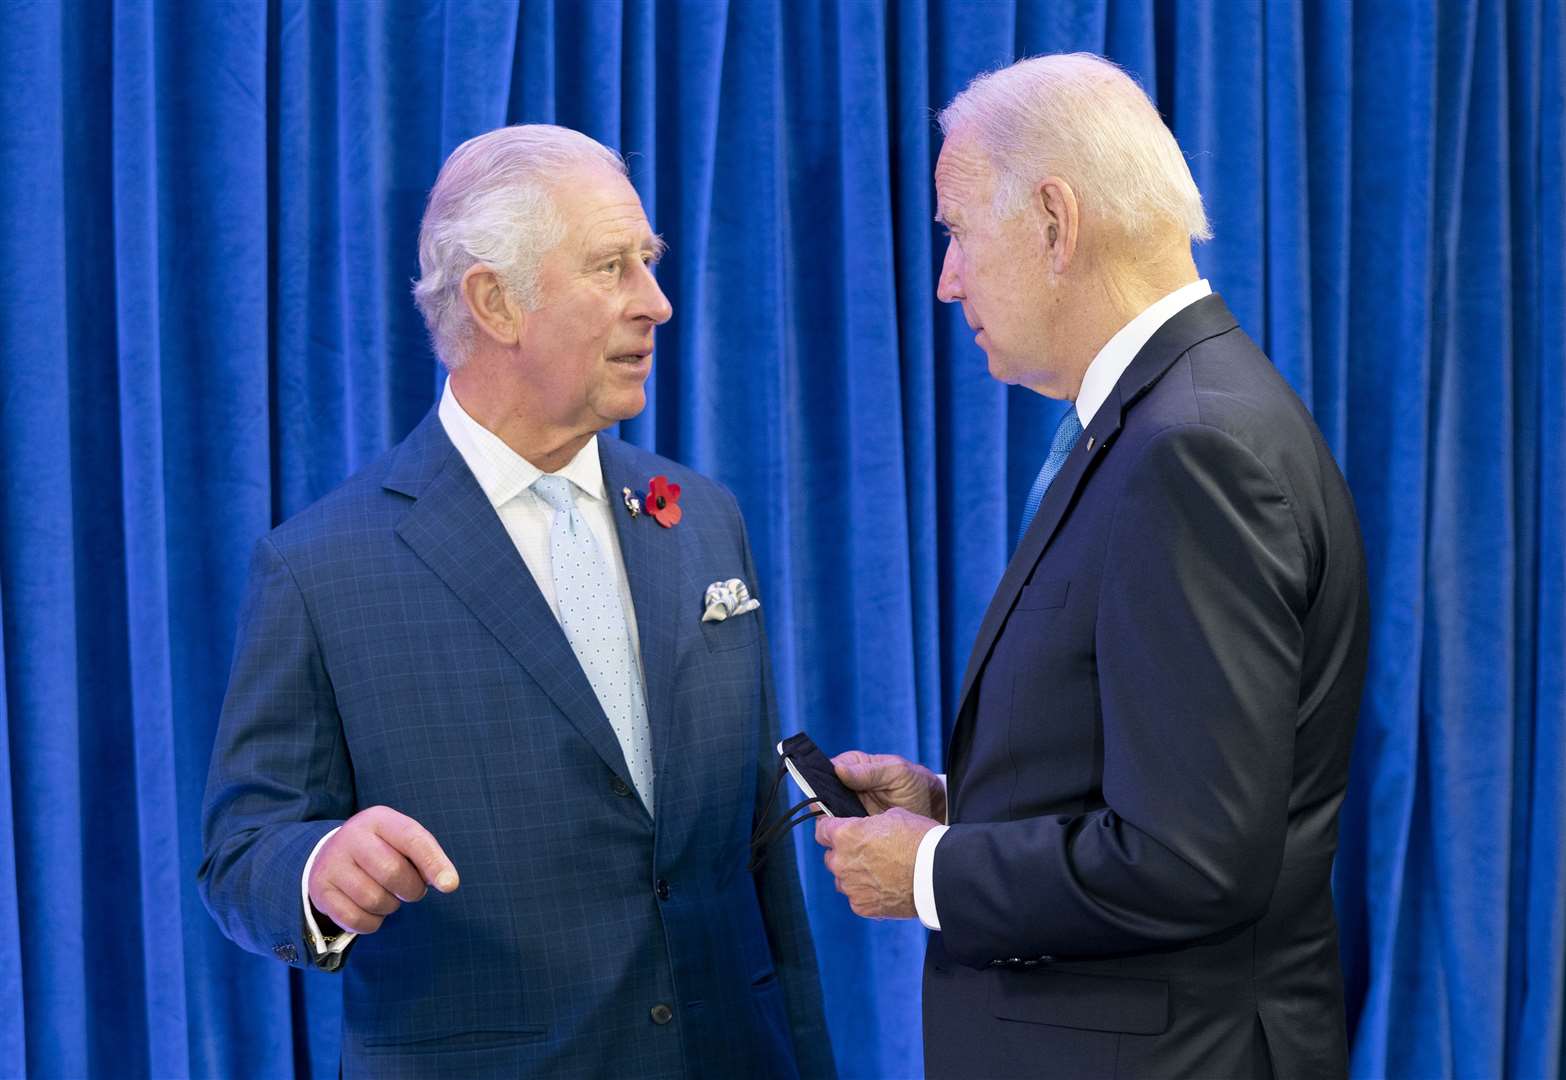 President Biden will meet the King and Rishi Sunak when he visits the UK before heading to Lithuania (Jane Barlow/PA)